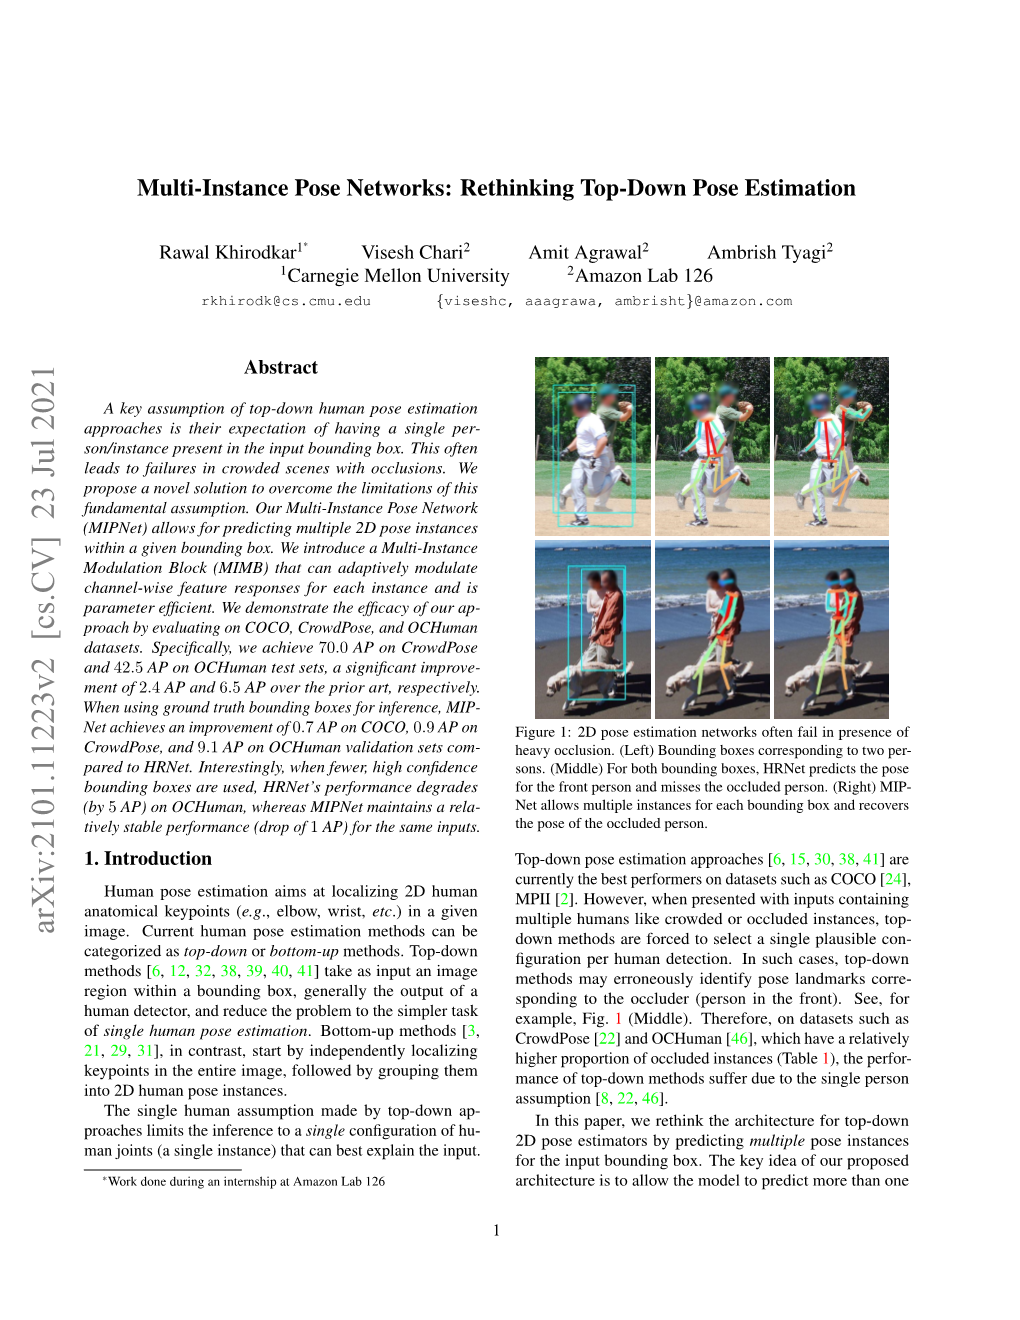 Multi-Hypothesis Pose Networks: Rethinking Top-Down Pose